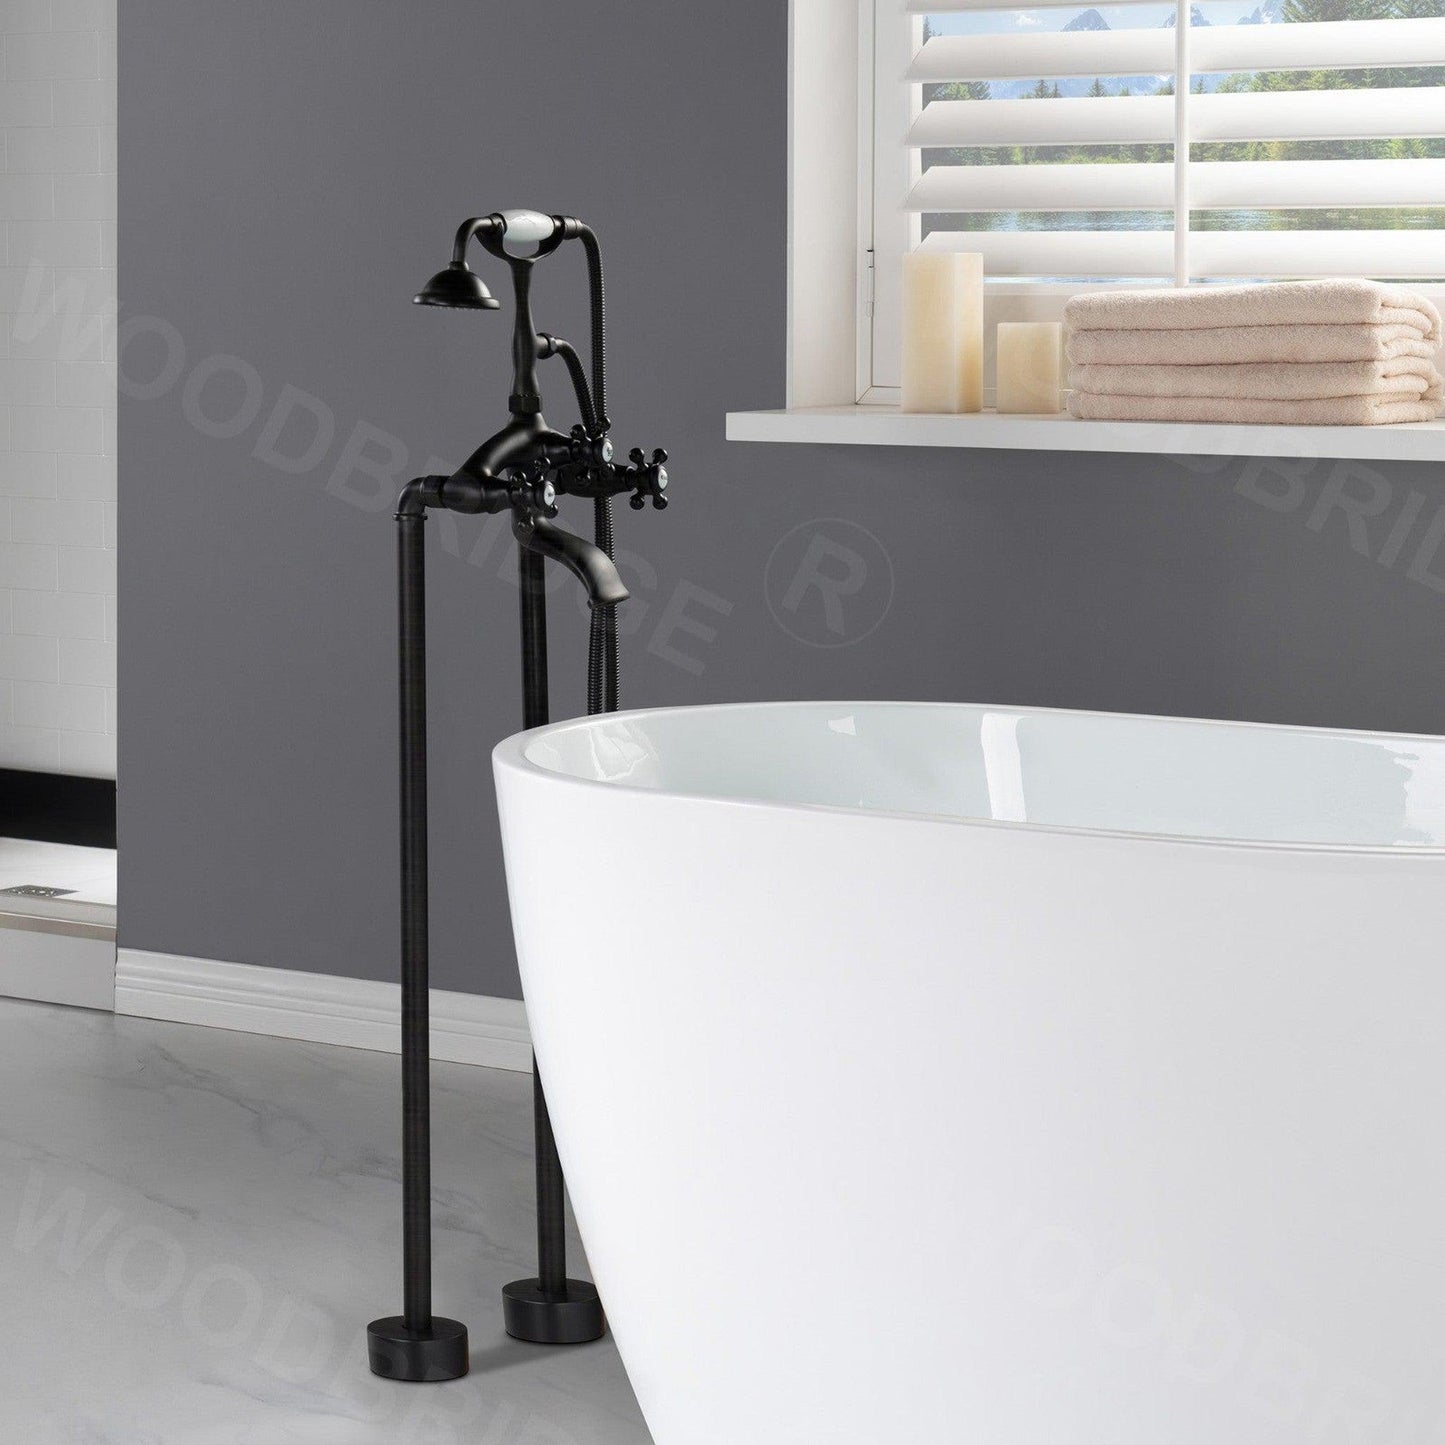 WoodBridge F0029ORB Oil Rubbed Bronze Freestanding Clawfoot Tub Filler Faucet With Hand Shower and Hose